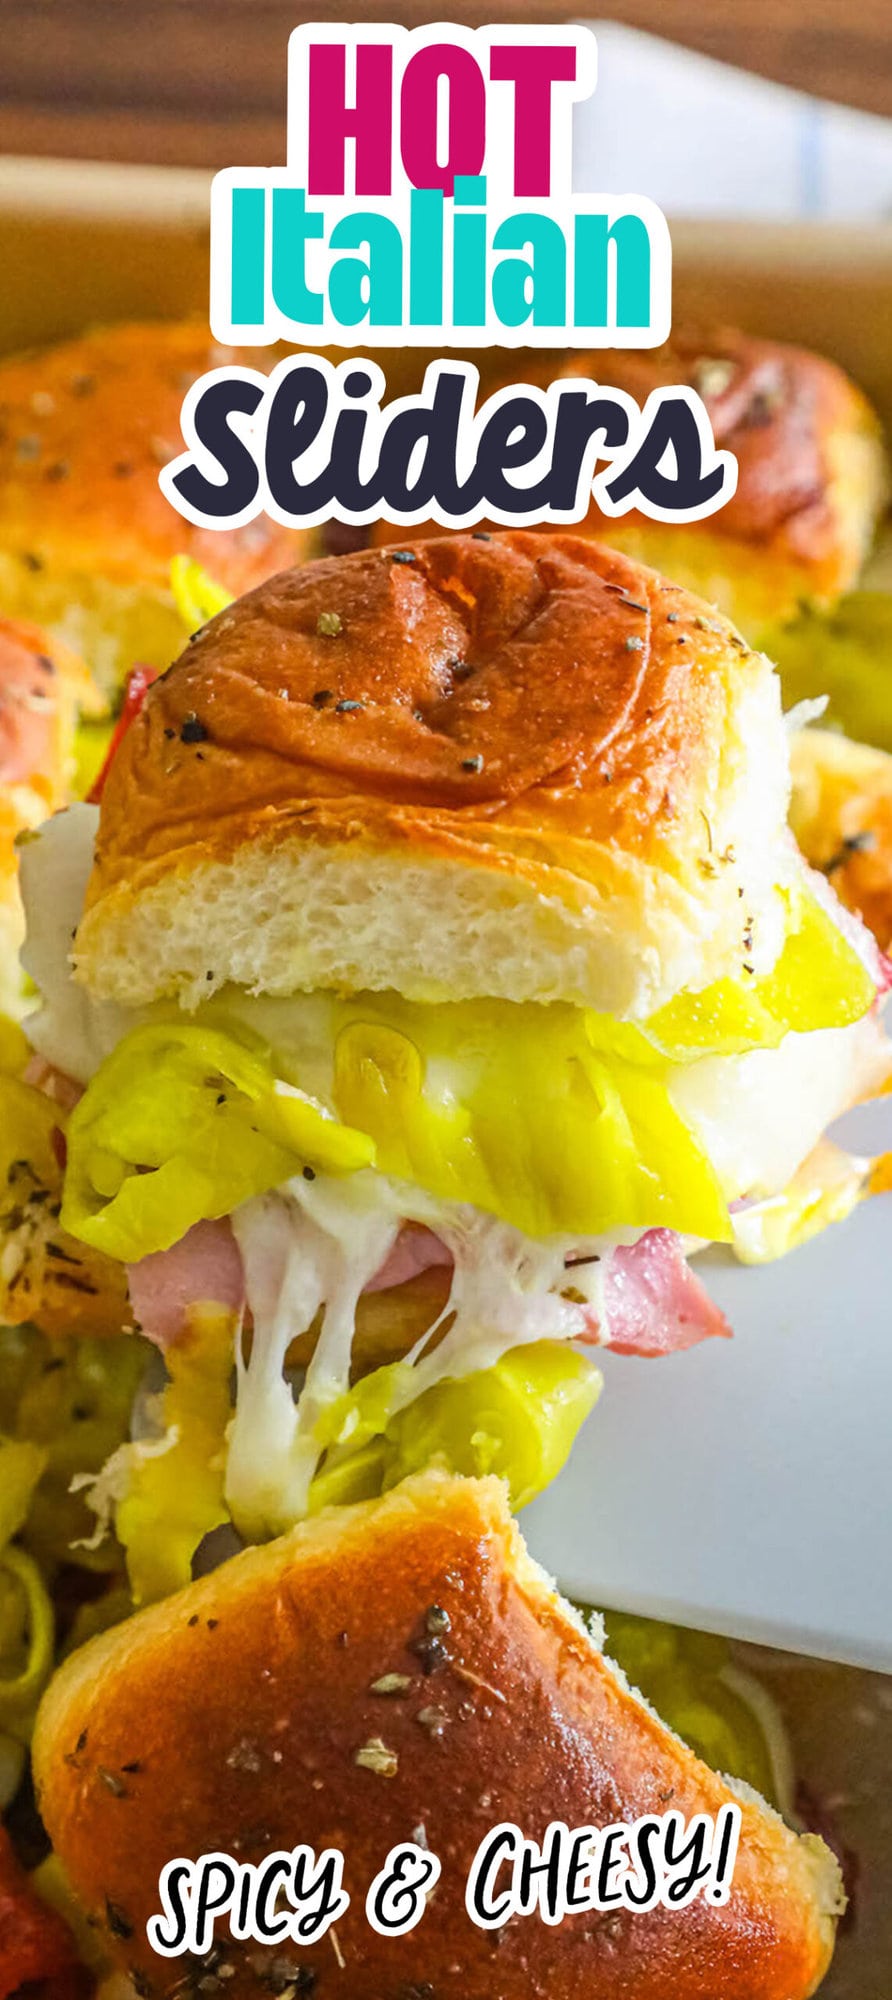 rolls with ham, cheese, and pepperoncini in between them